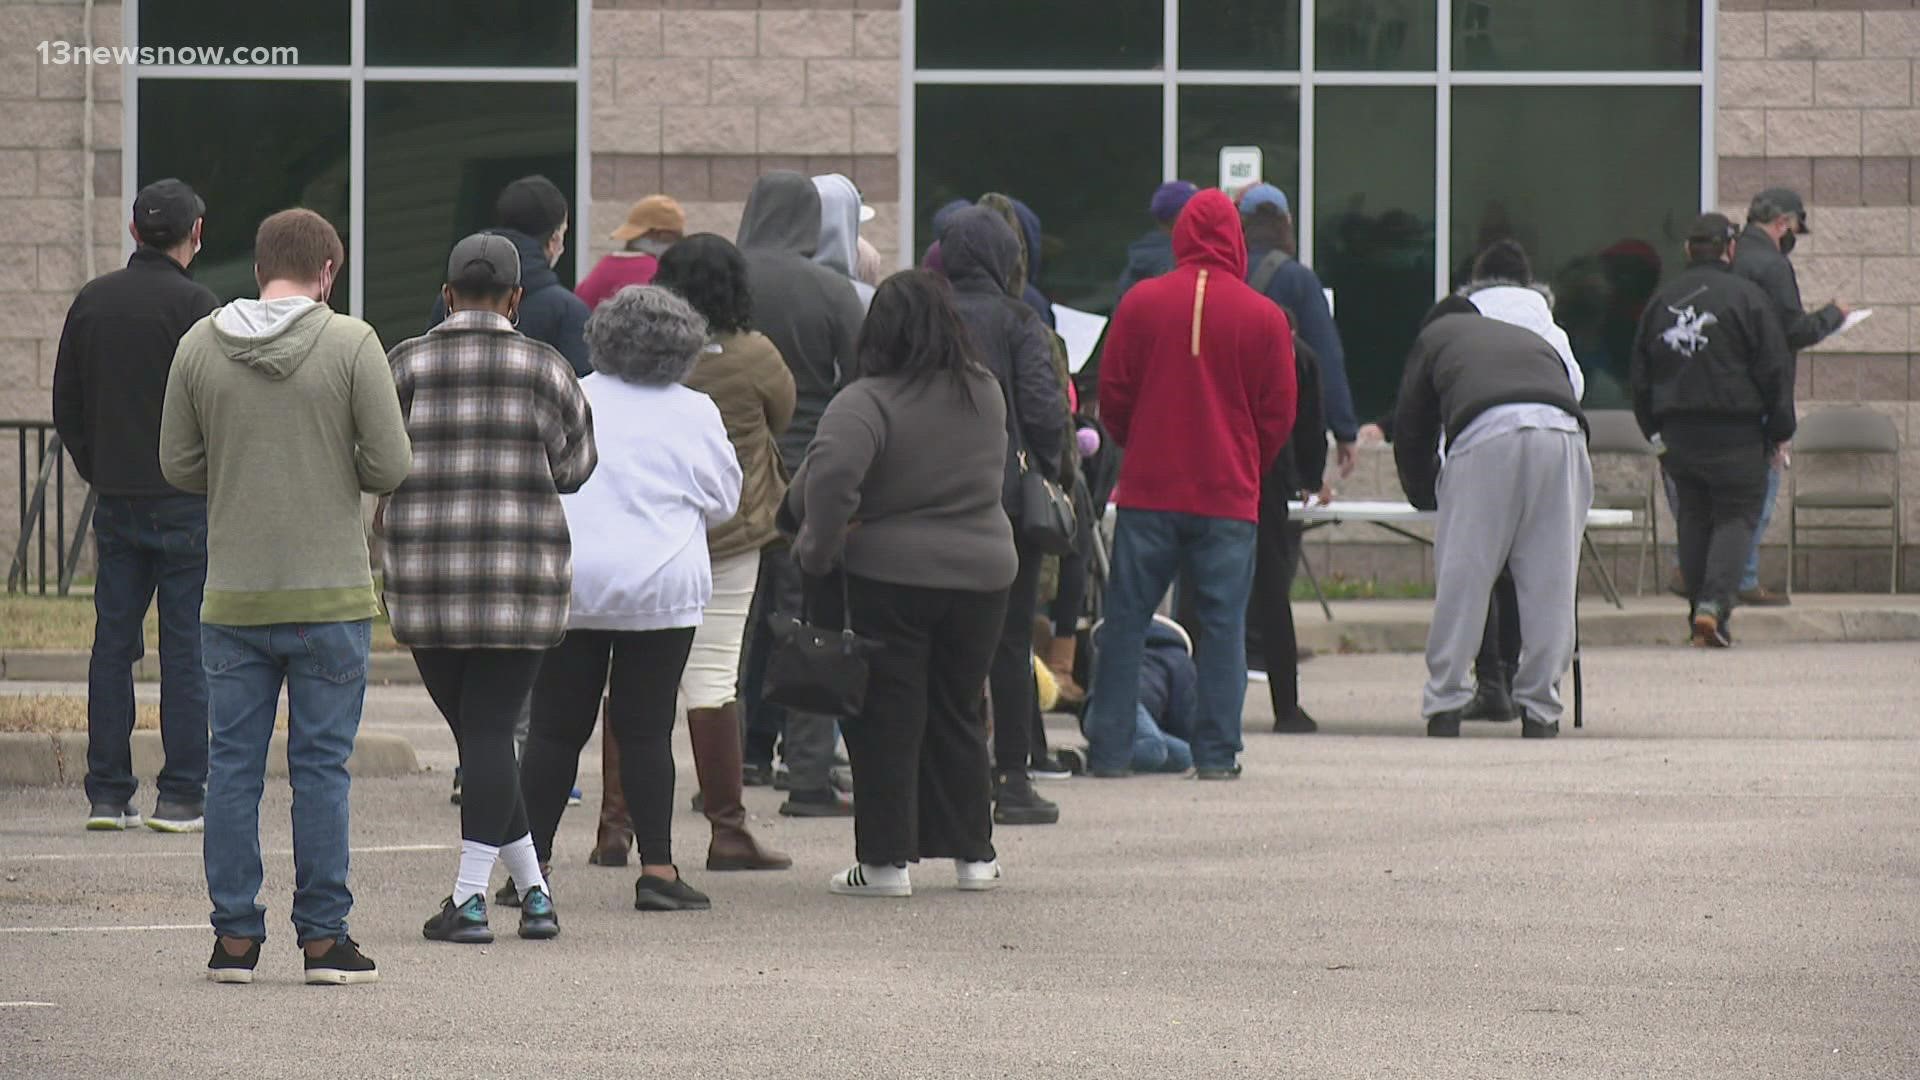 Following the holidays, people are heading out and waiting in long lines for COVID-19 tests.